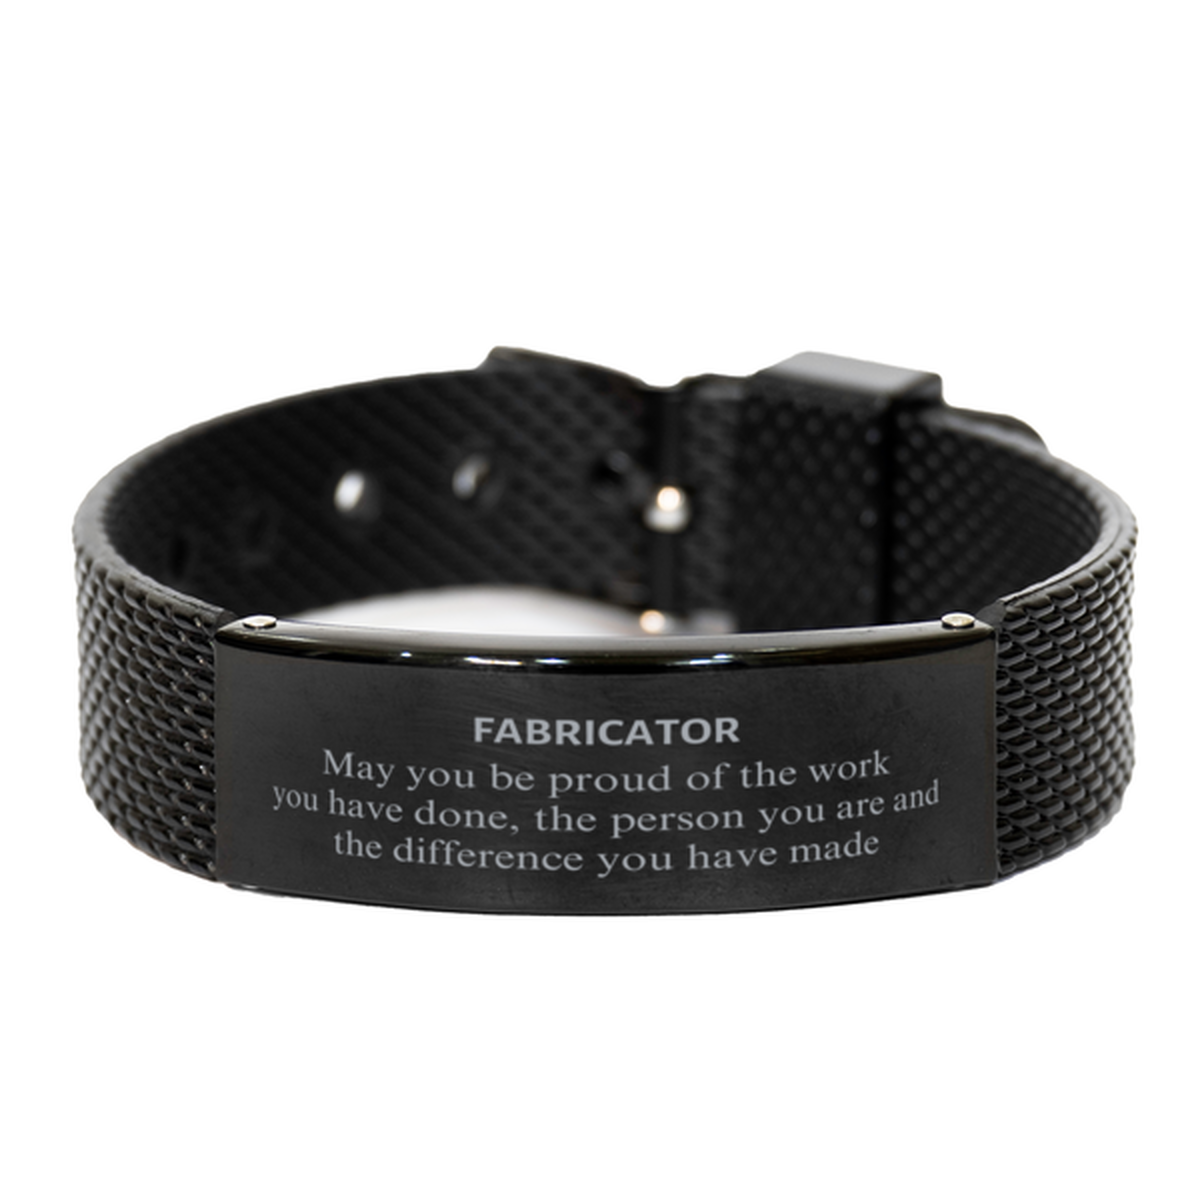 Fabricator May you be proud of the work you have done, Retirement Fabricator Black Shark Mesh Bracelet for Colleague Appreciation Gifts Amazing for Fabricator